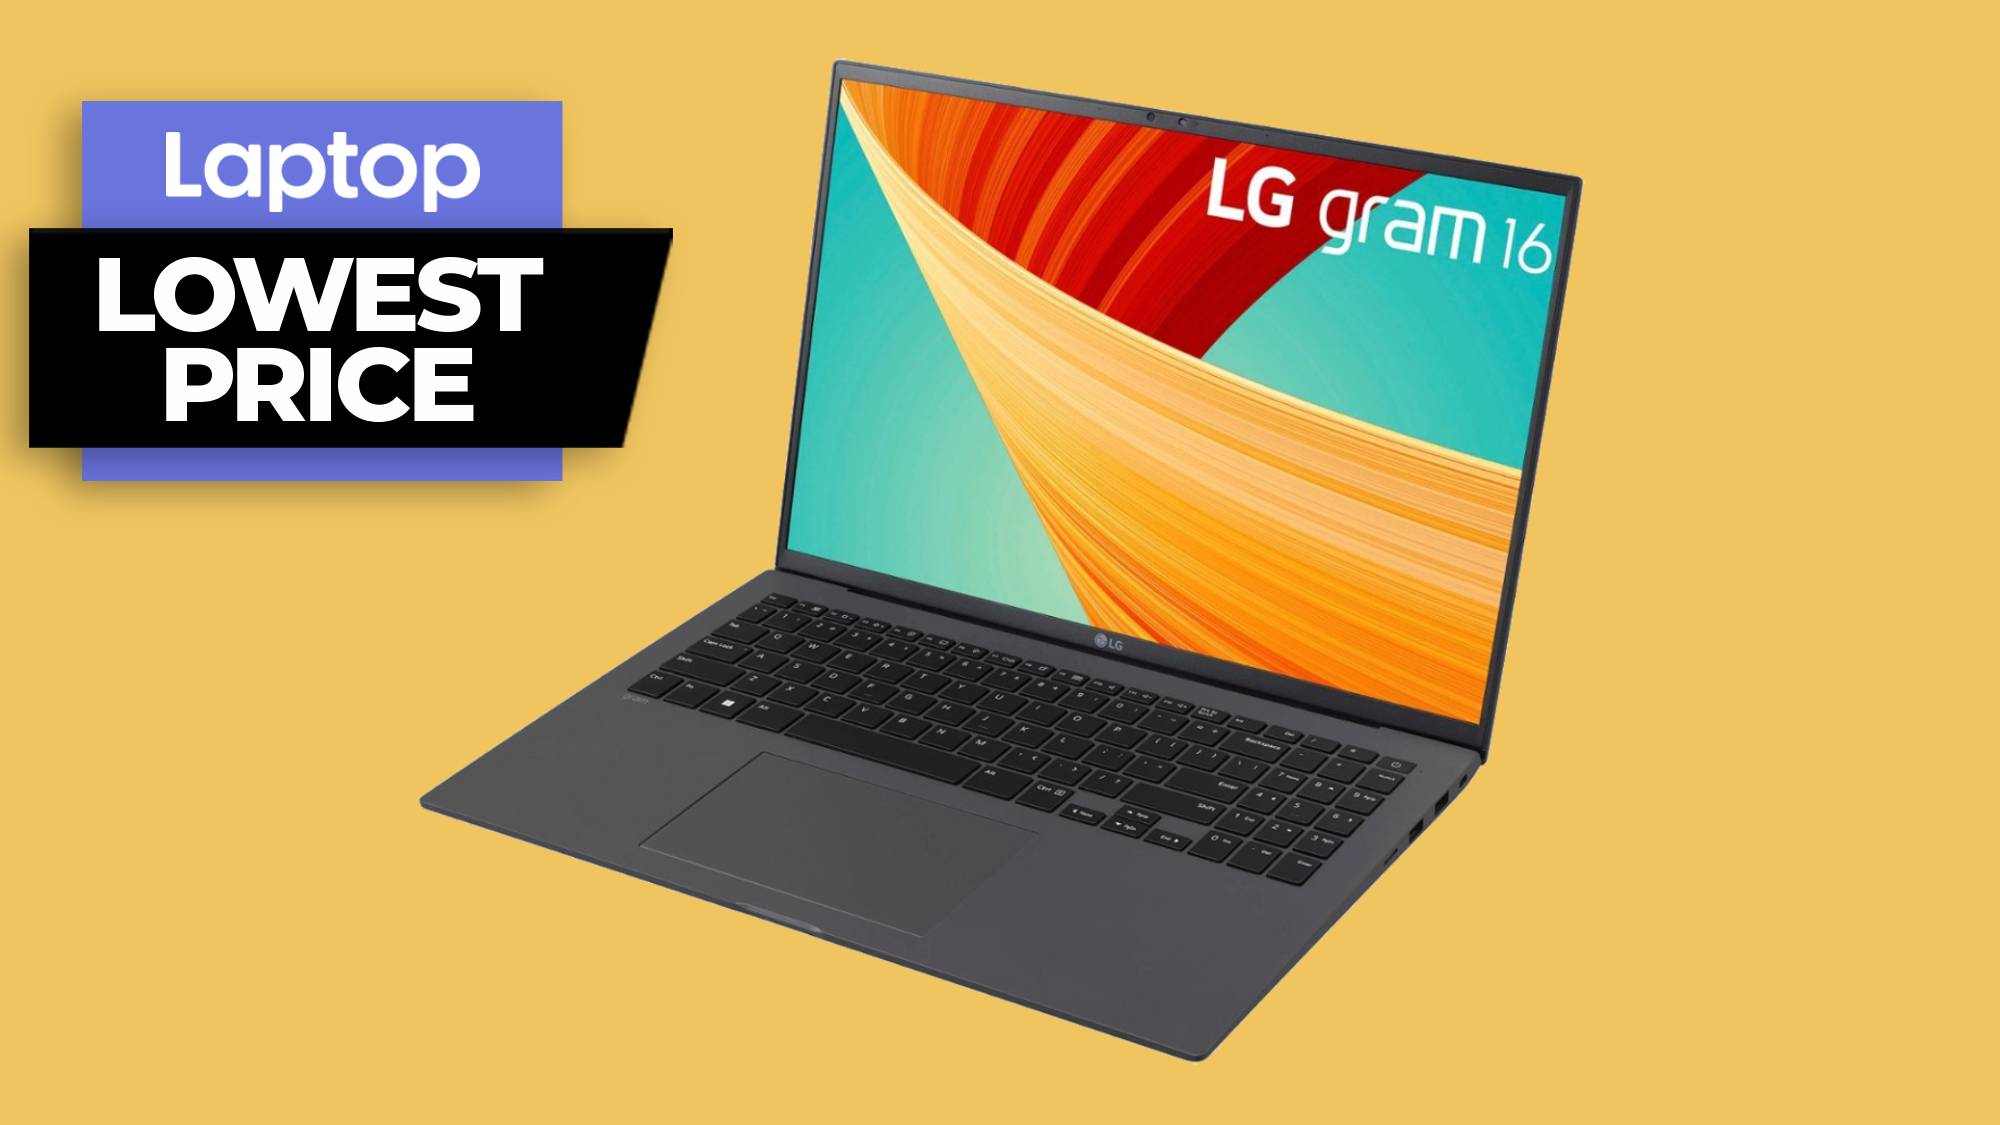 Forget MacBook Pro, the LG gram 16 is $700 off now and at lowest price ...